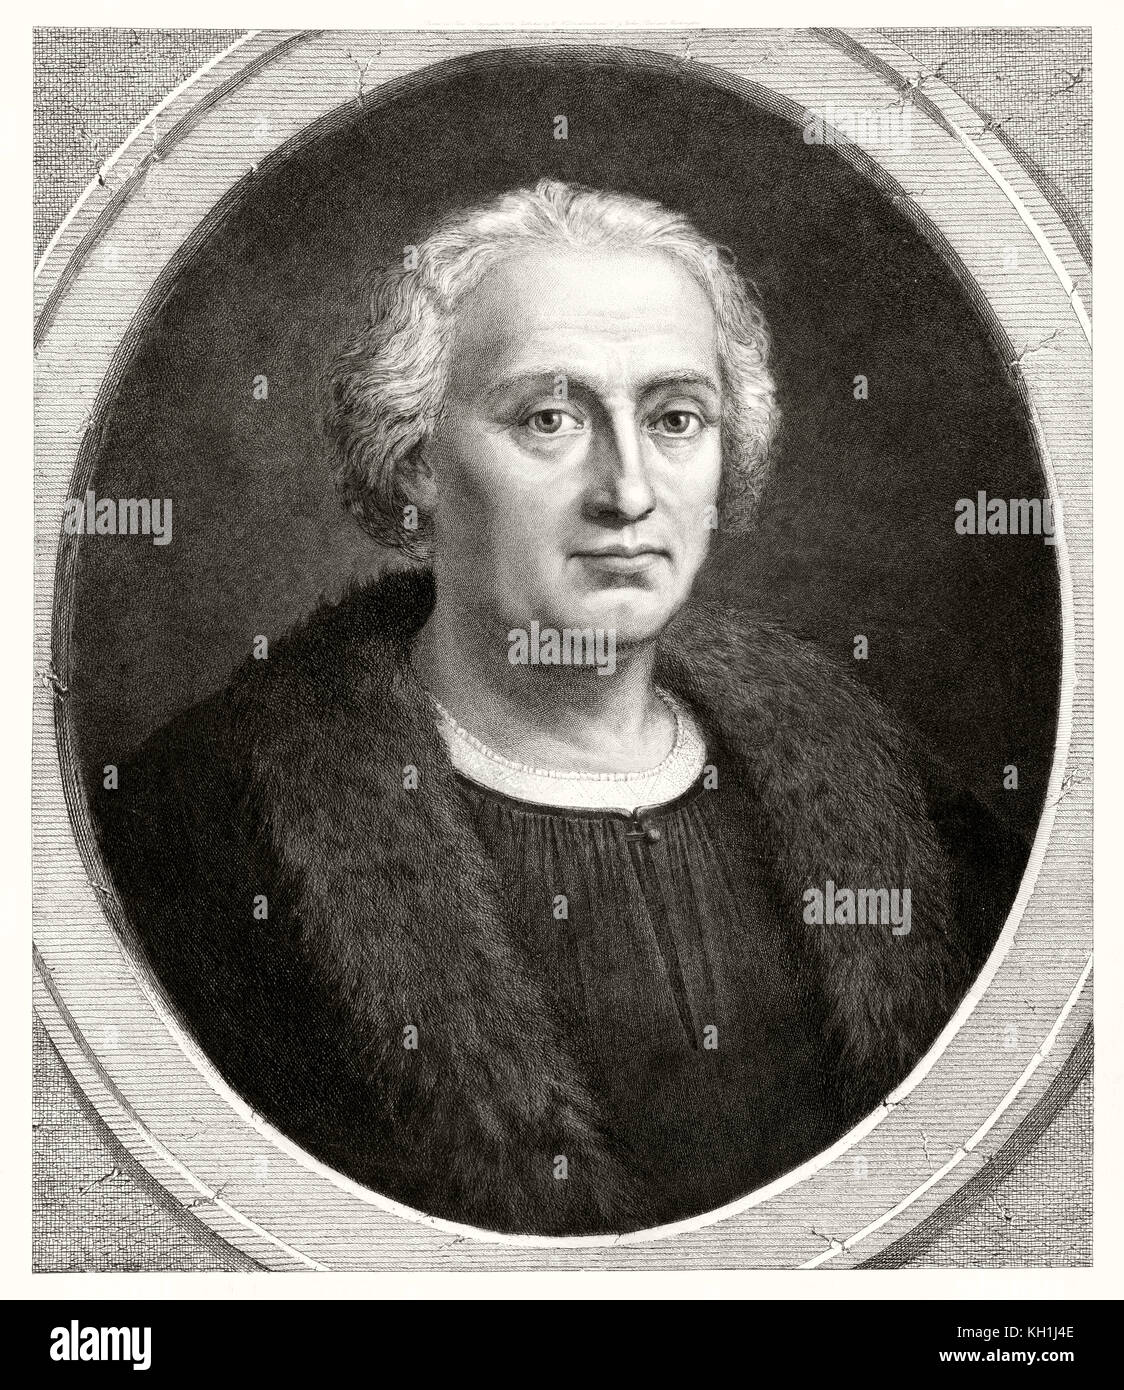 Old bust portrait of Christopher Columbus (1451 – 1506), Italian explorer and navigator. By unidentified author, publ. in Washington, 1892 Stock Photo